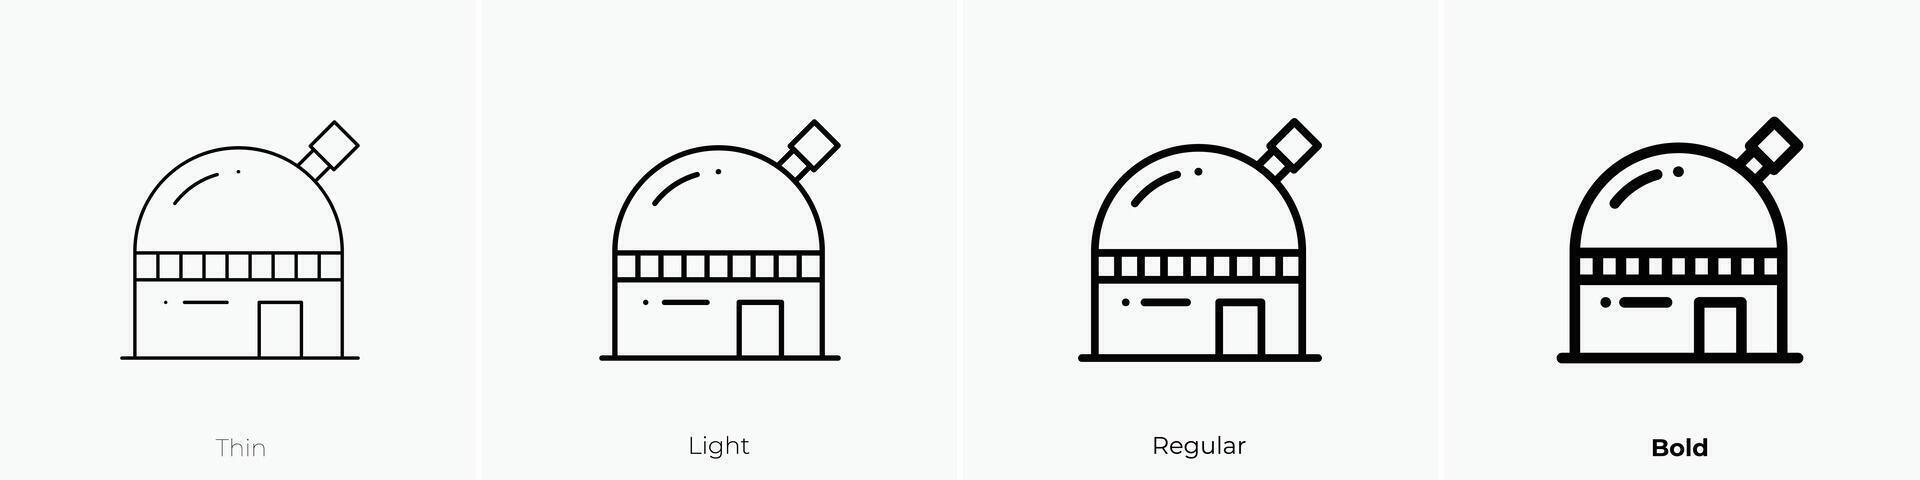 observatory icon. Thin, Light, Regular And Bold style design isolated on white background vector